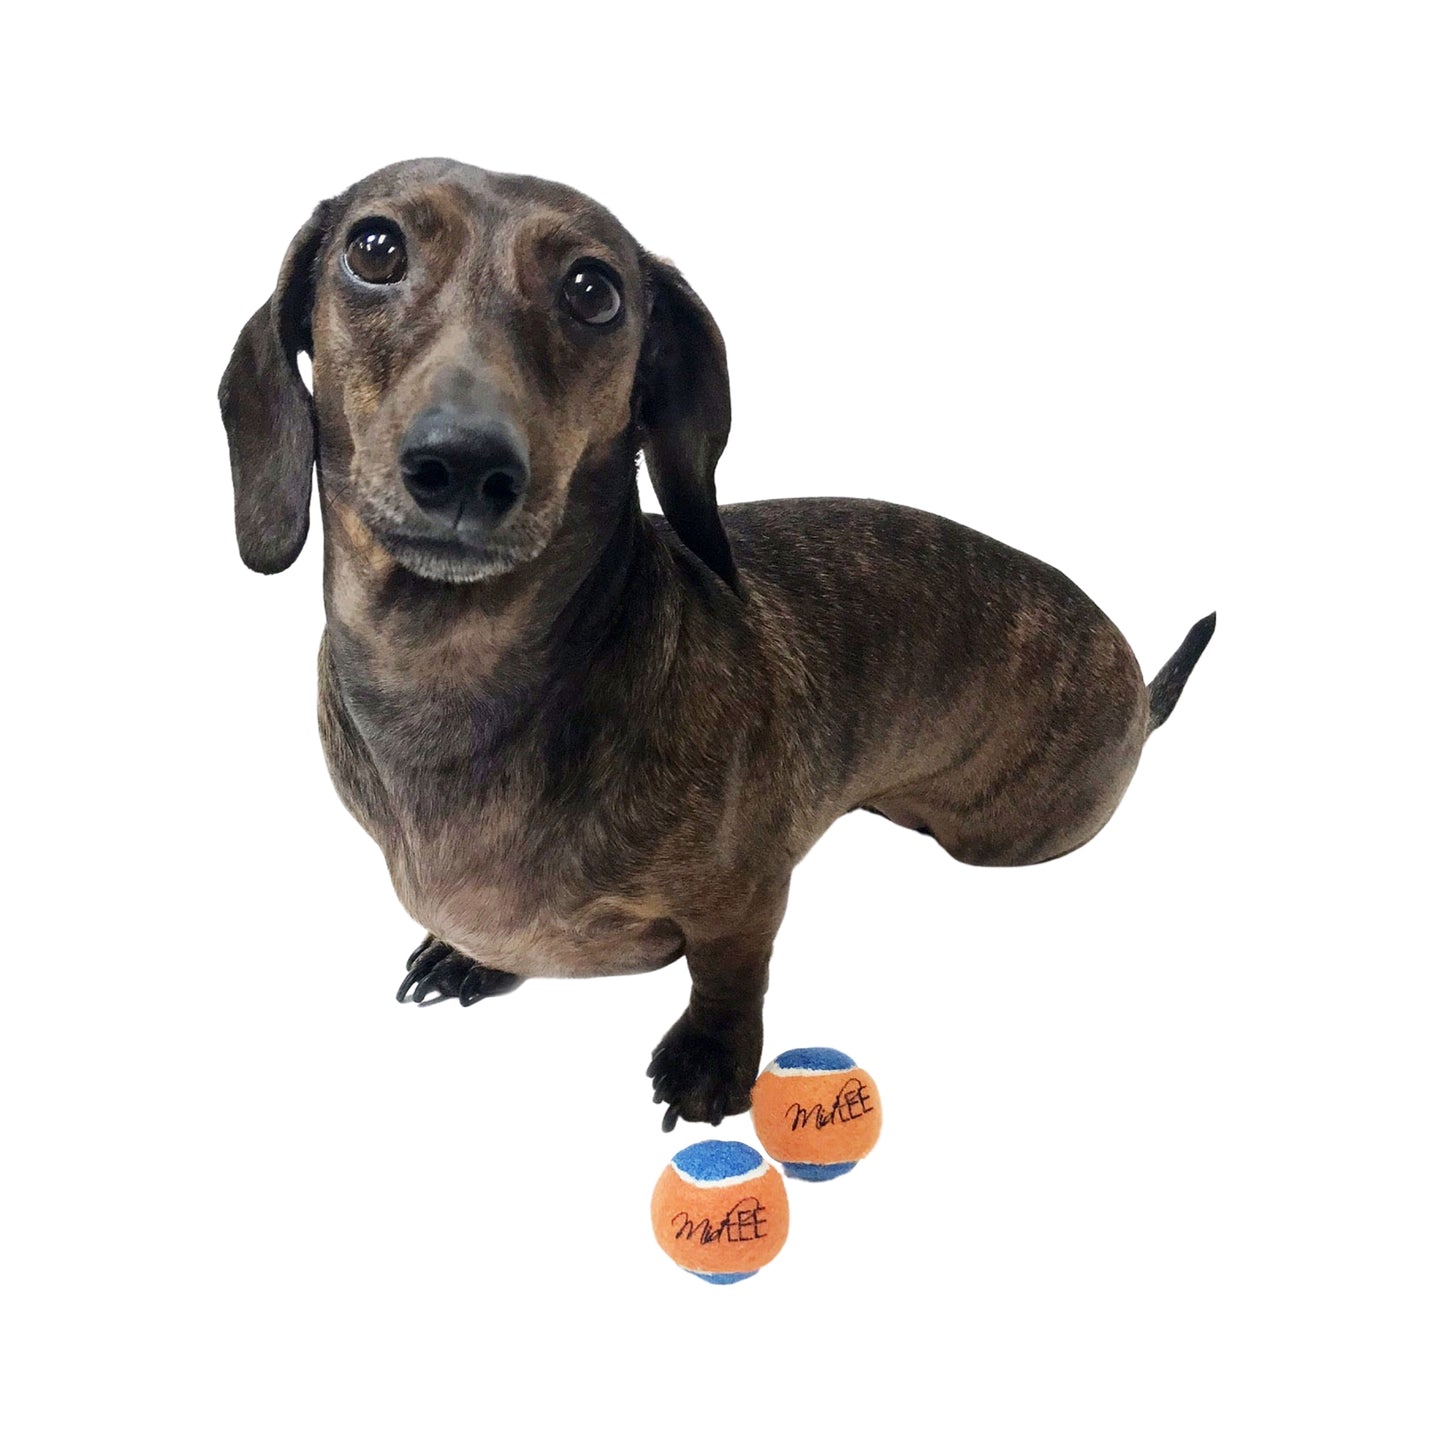 Midlee Squeaky Mini Tennis Ball for Dogs 1.5"- Pack of 12 (Orange/Blue)